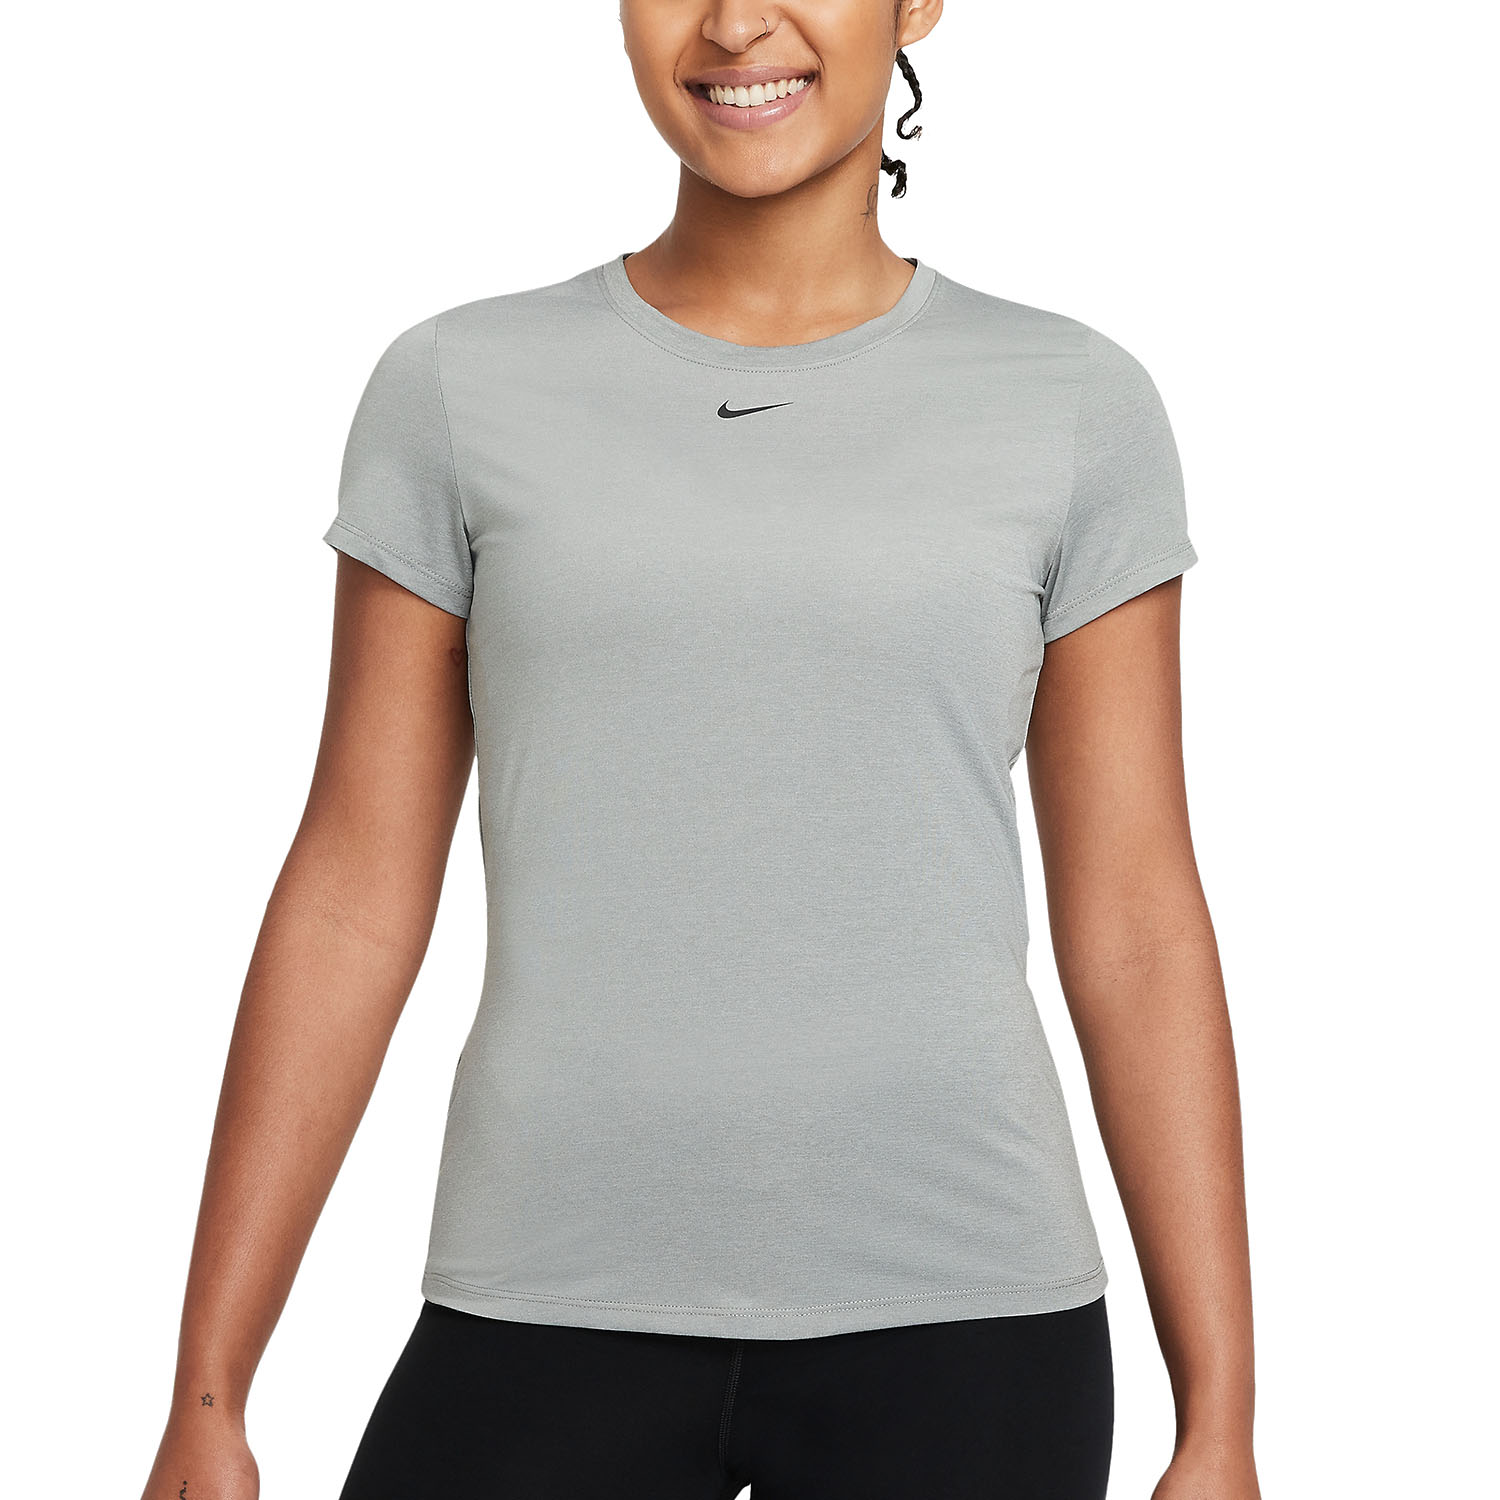 Nike Dri-FIT One Training Particle Grey